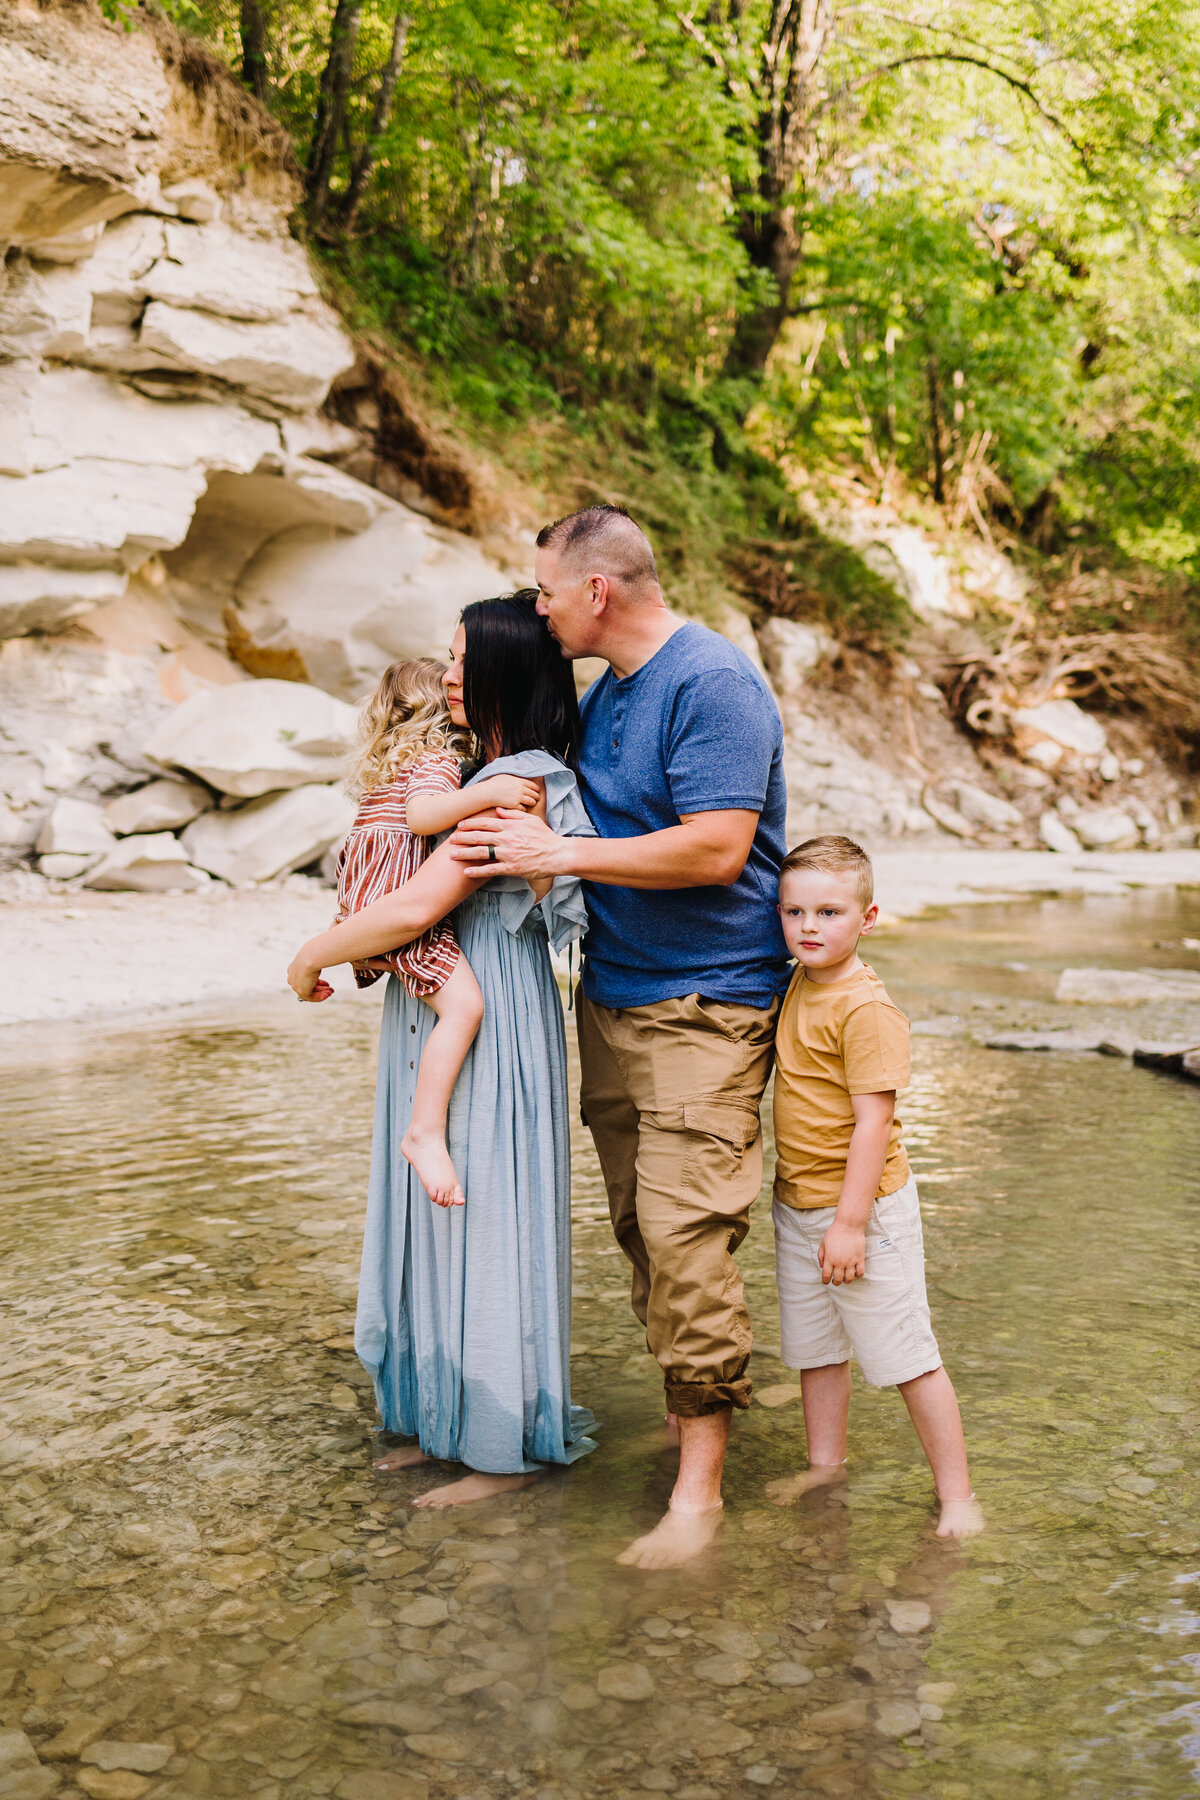 Beautiful family summer and spring mini session photography on a river. They are in front of a rock mountain with trees. The woman  is wearing blue long dress and the man is kissing her